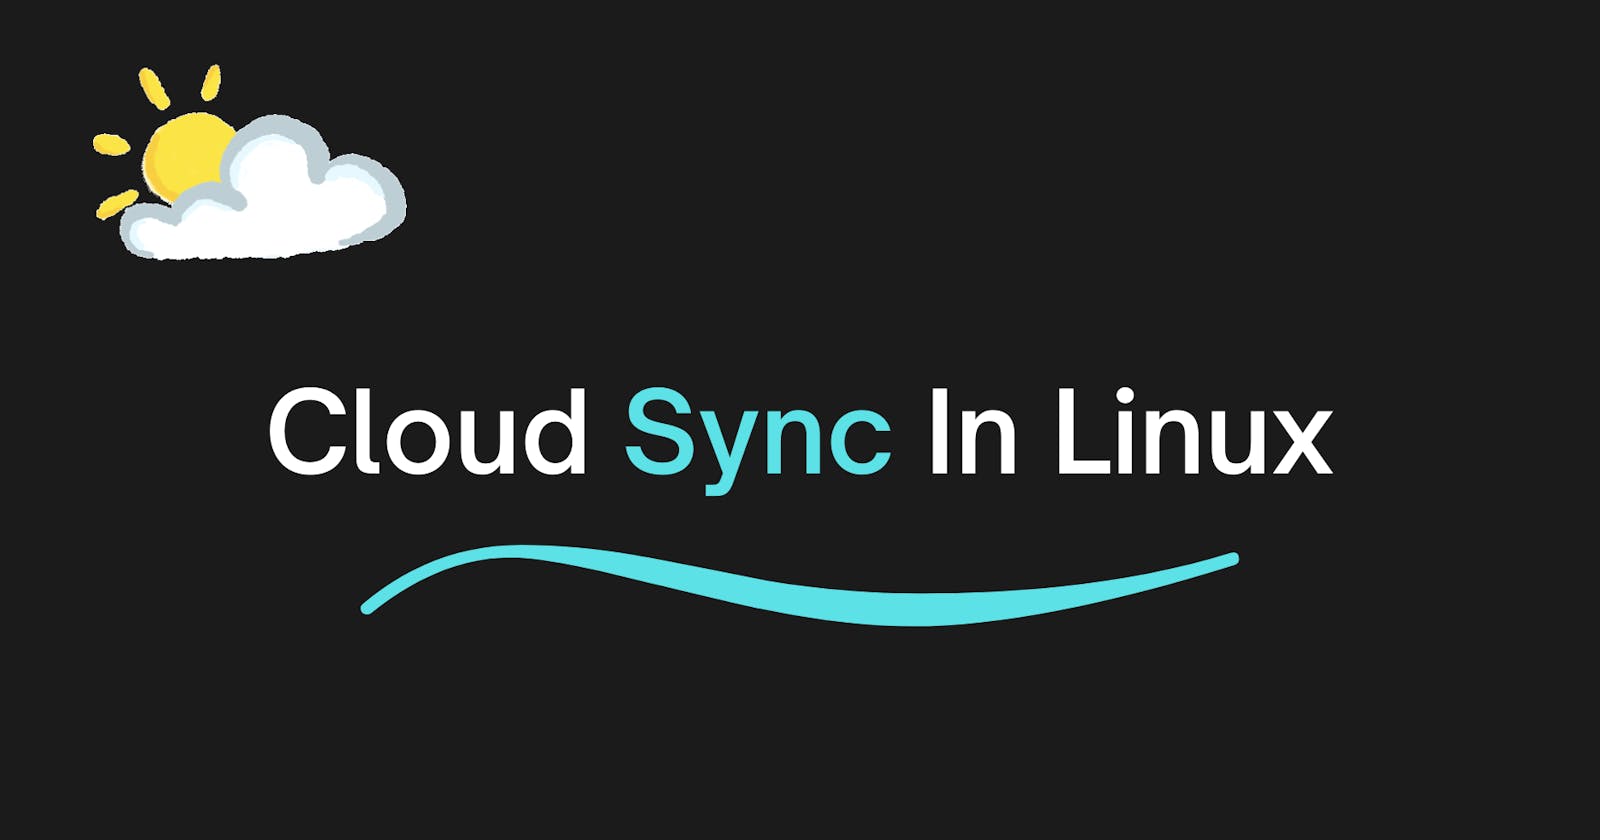 A Fast, Secure Cloud Storage Sync For Linux